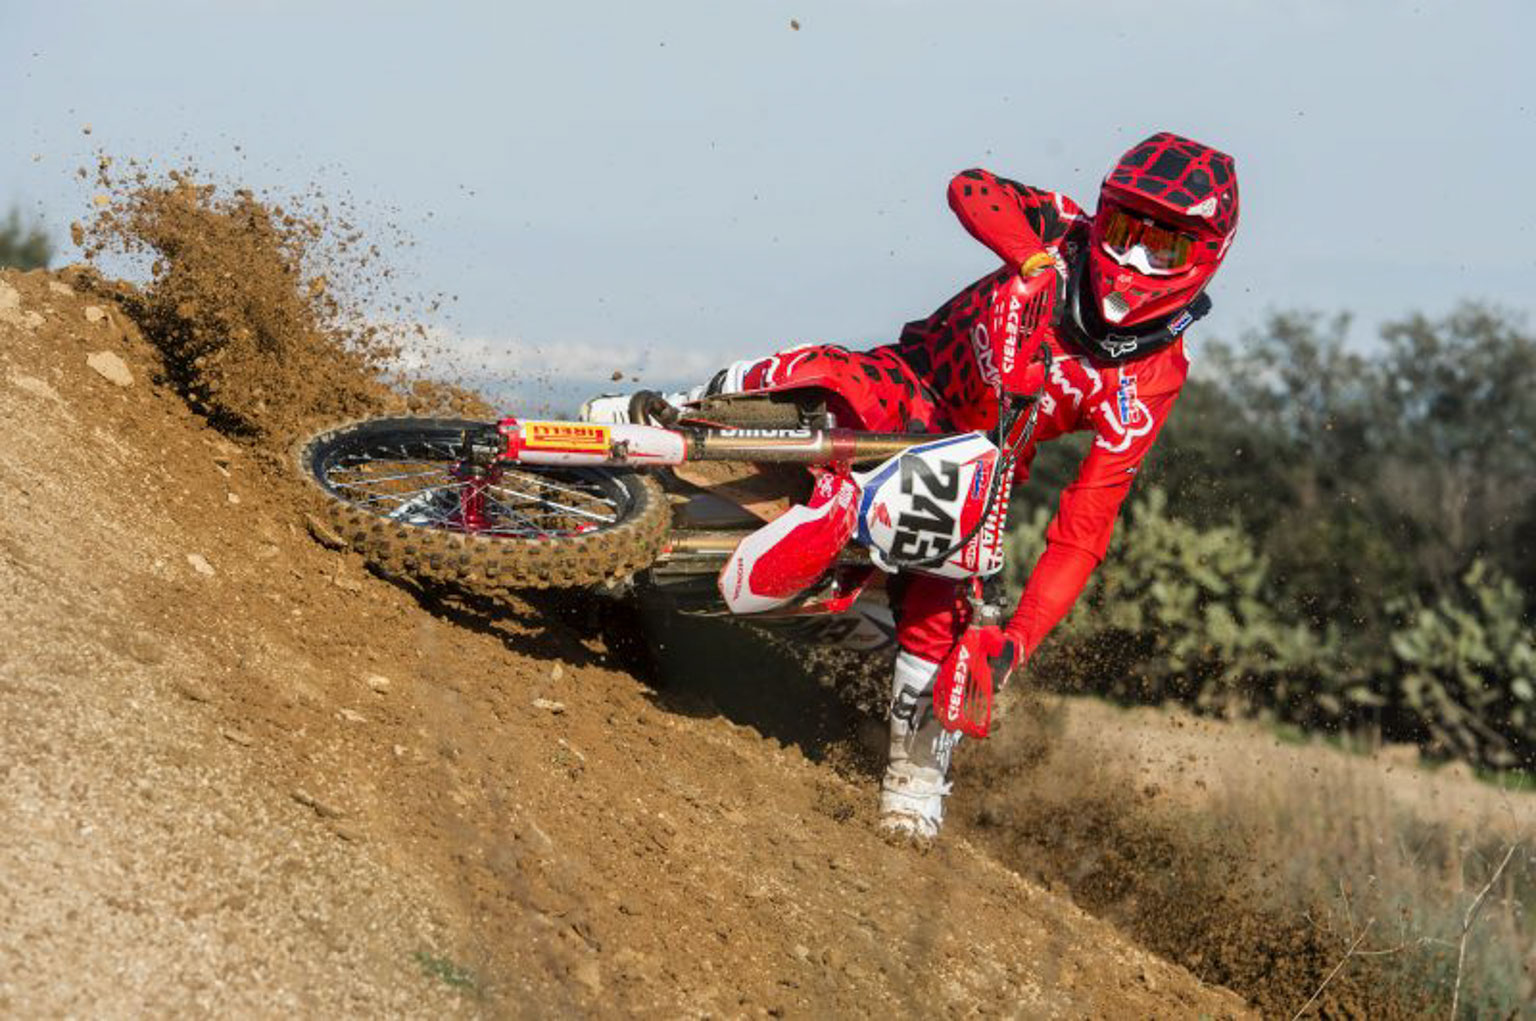 Gajser hopes to win again in 2017